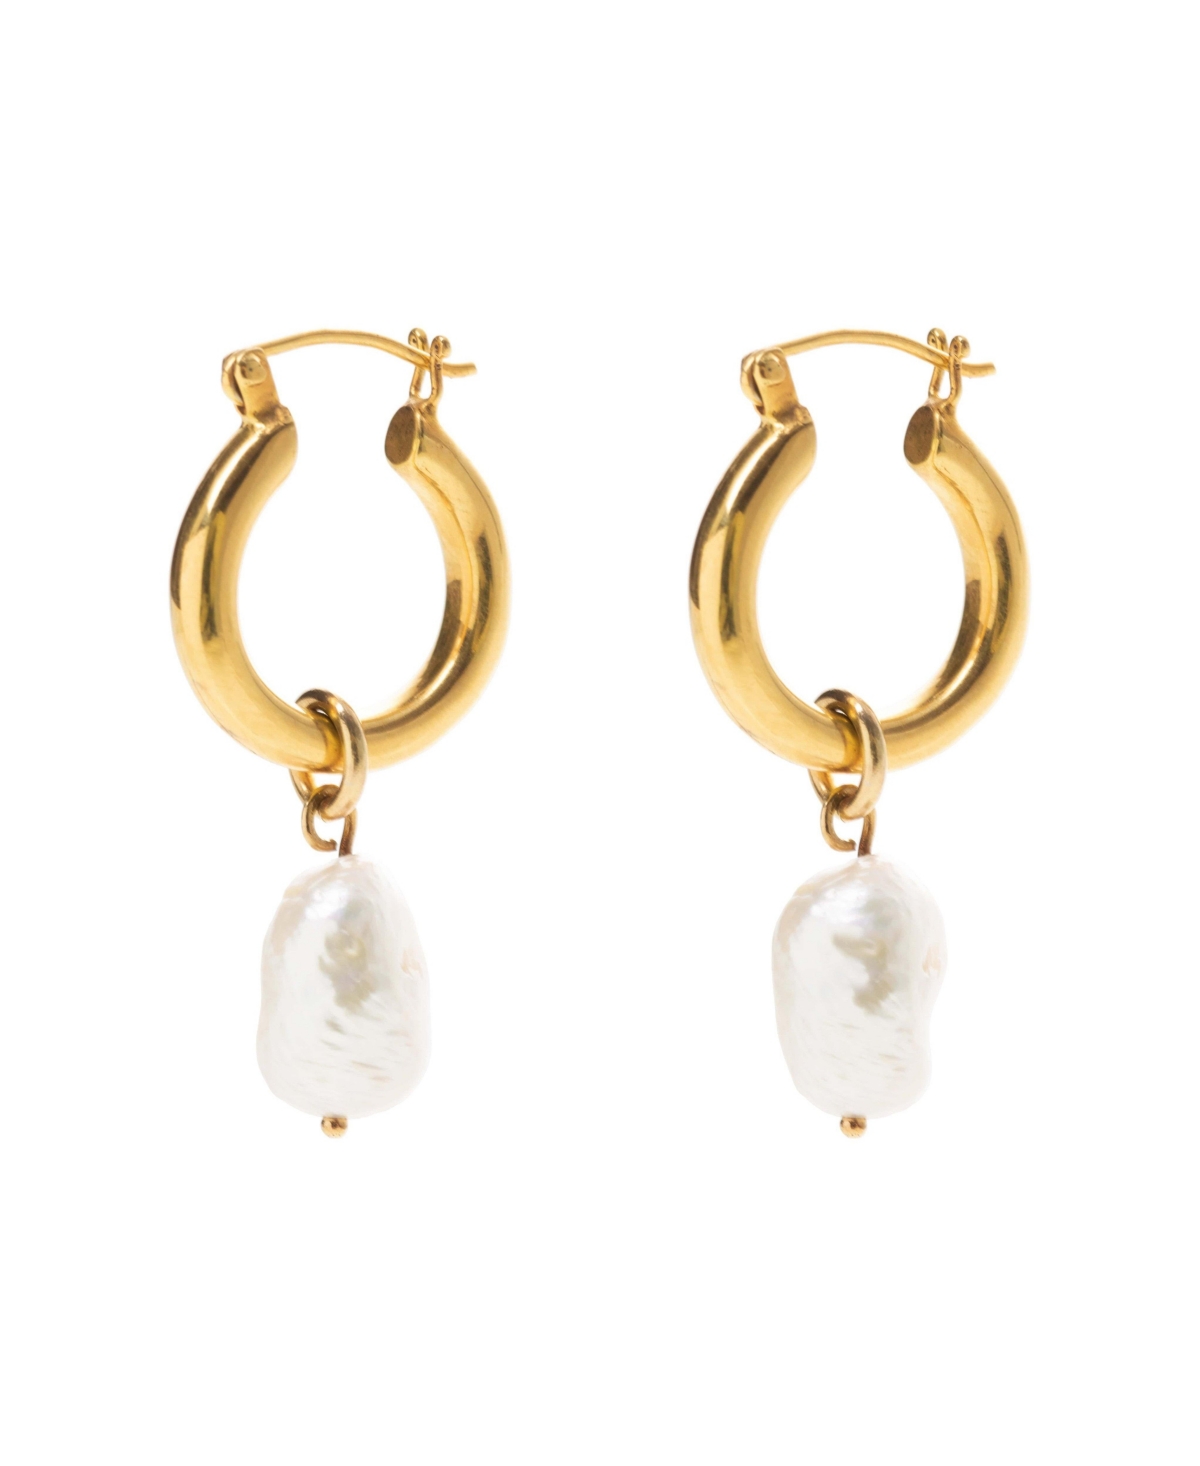 Gold Mini Hoops with Baroque Pearls - Gold